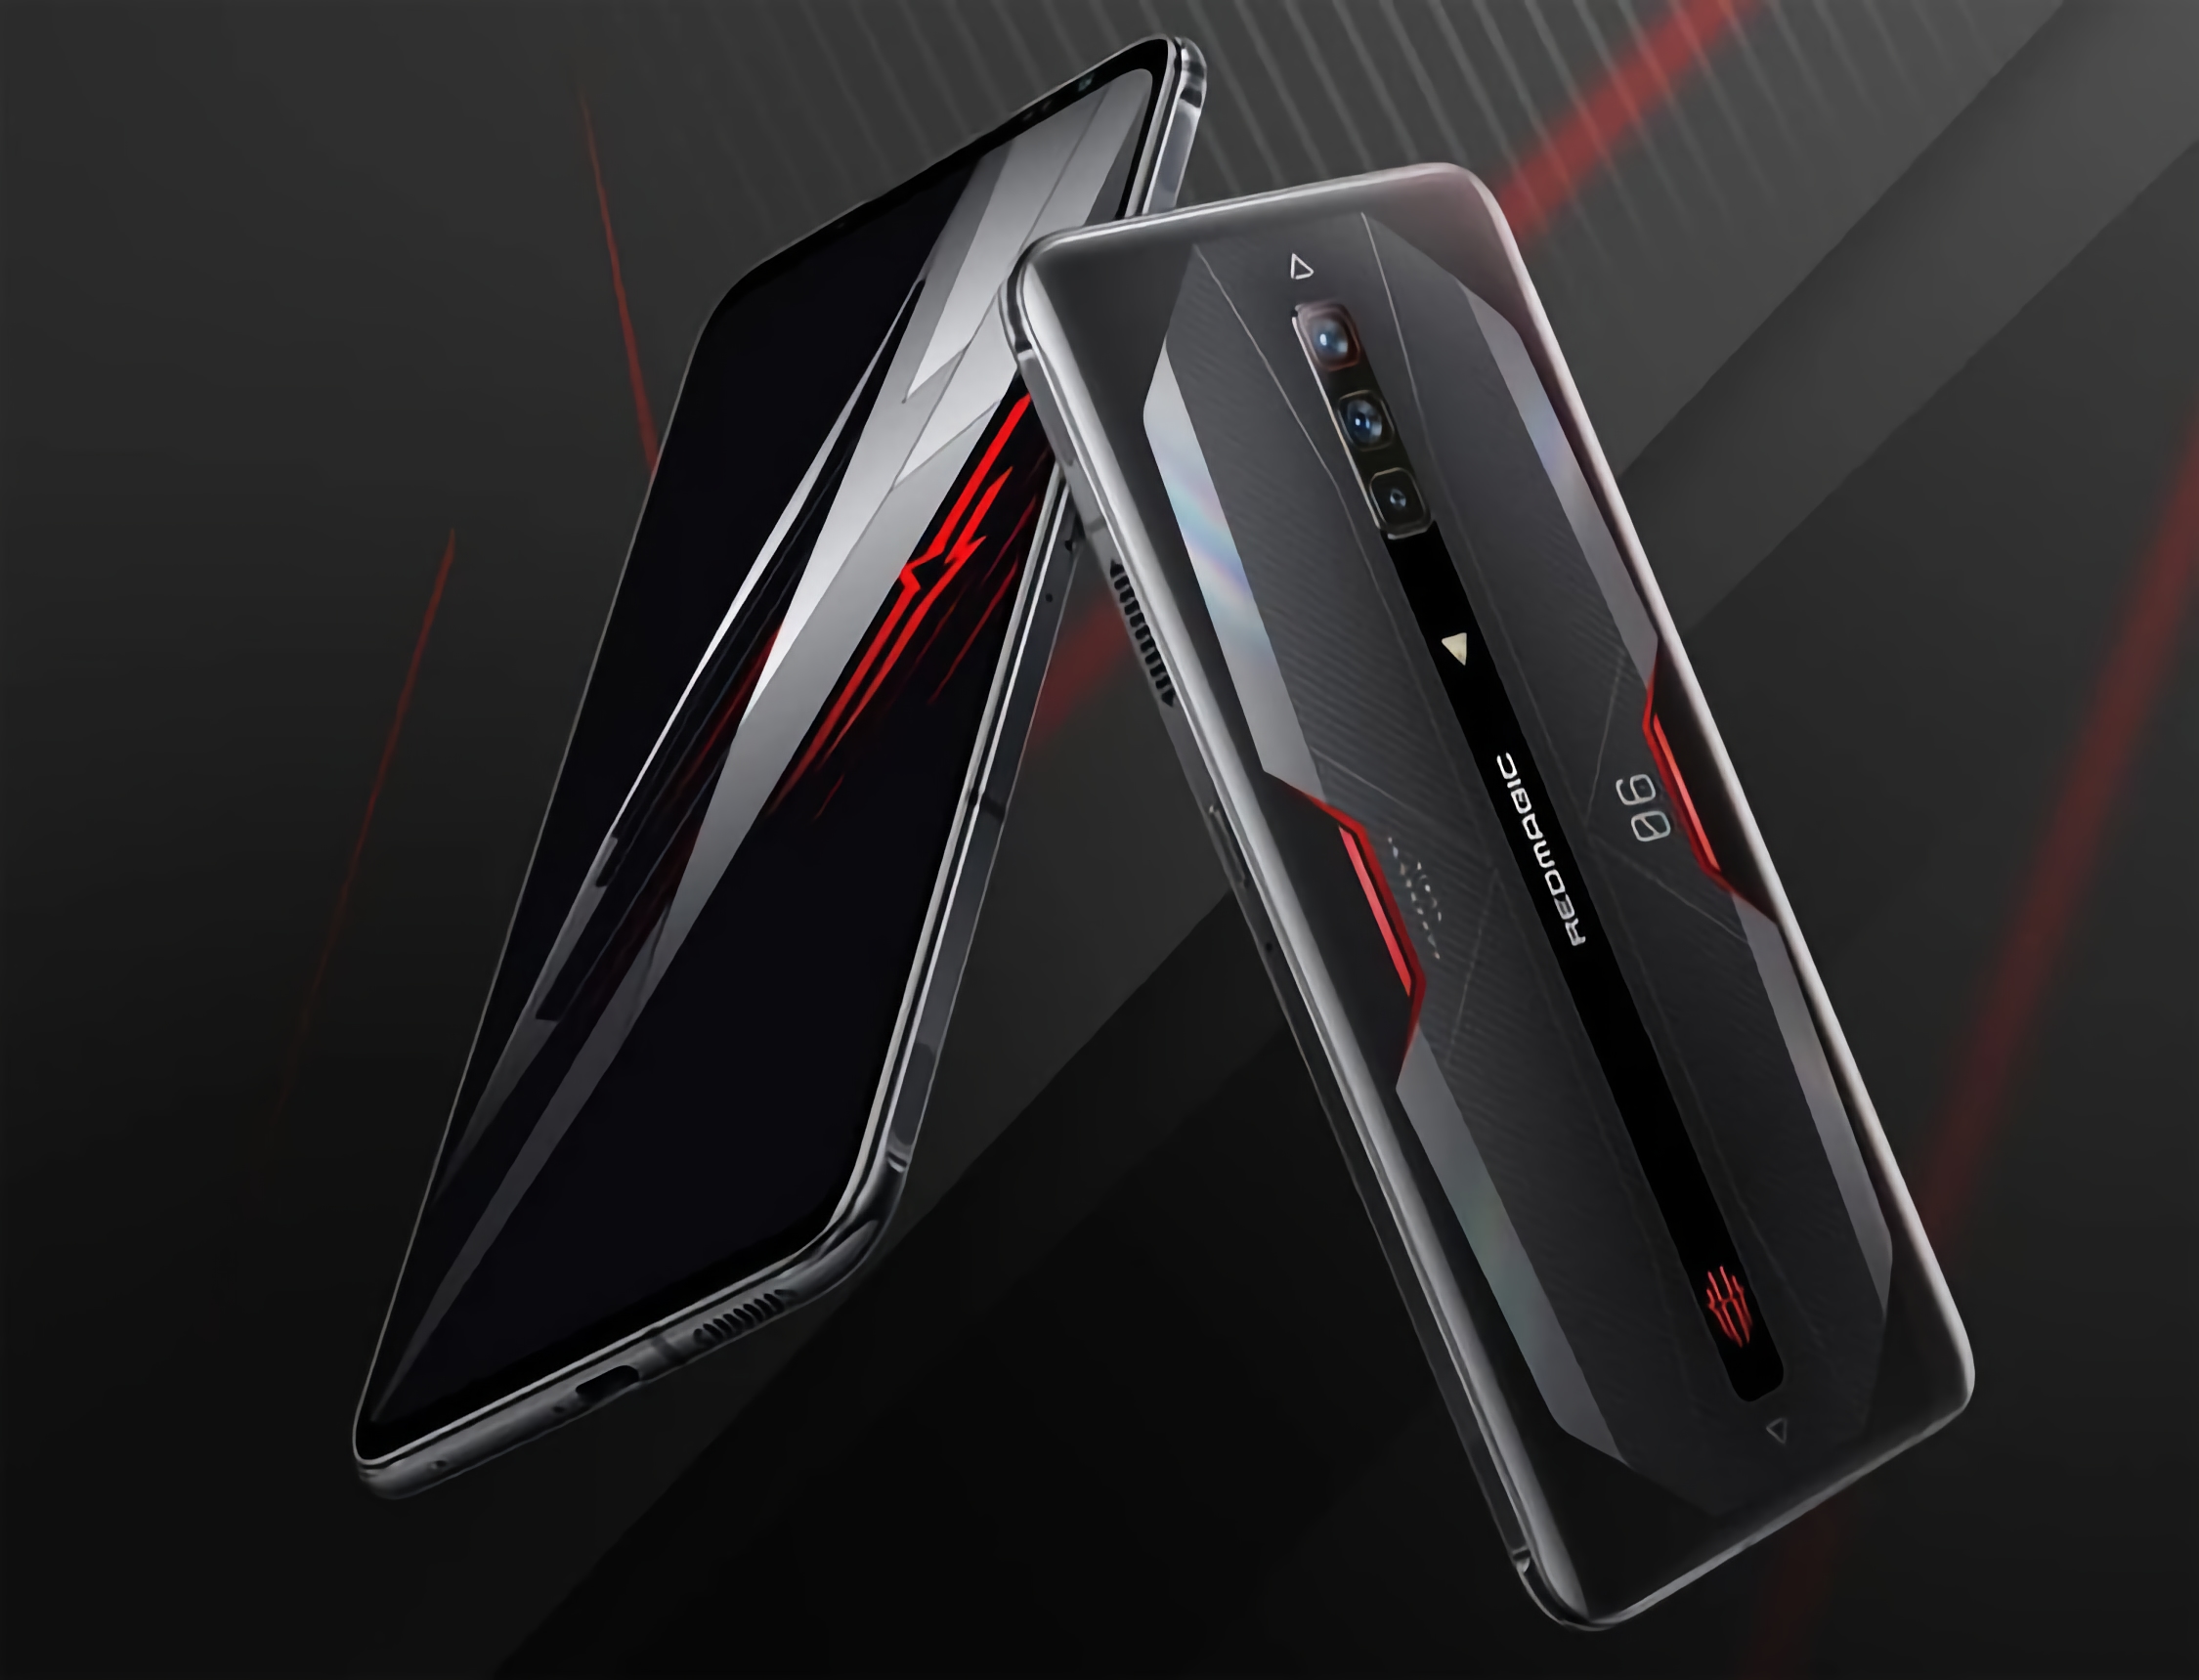 Aerospace technology in a smartphone: Nubia teases features of Red Magic 6S Pro gaming device